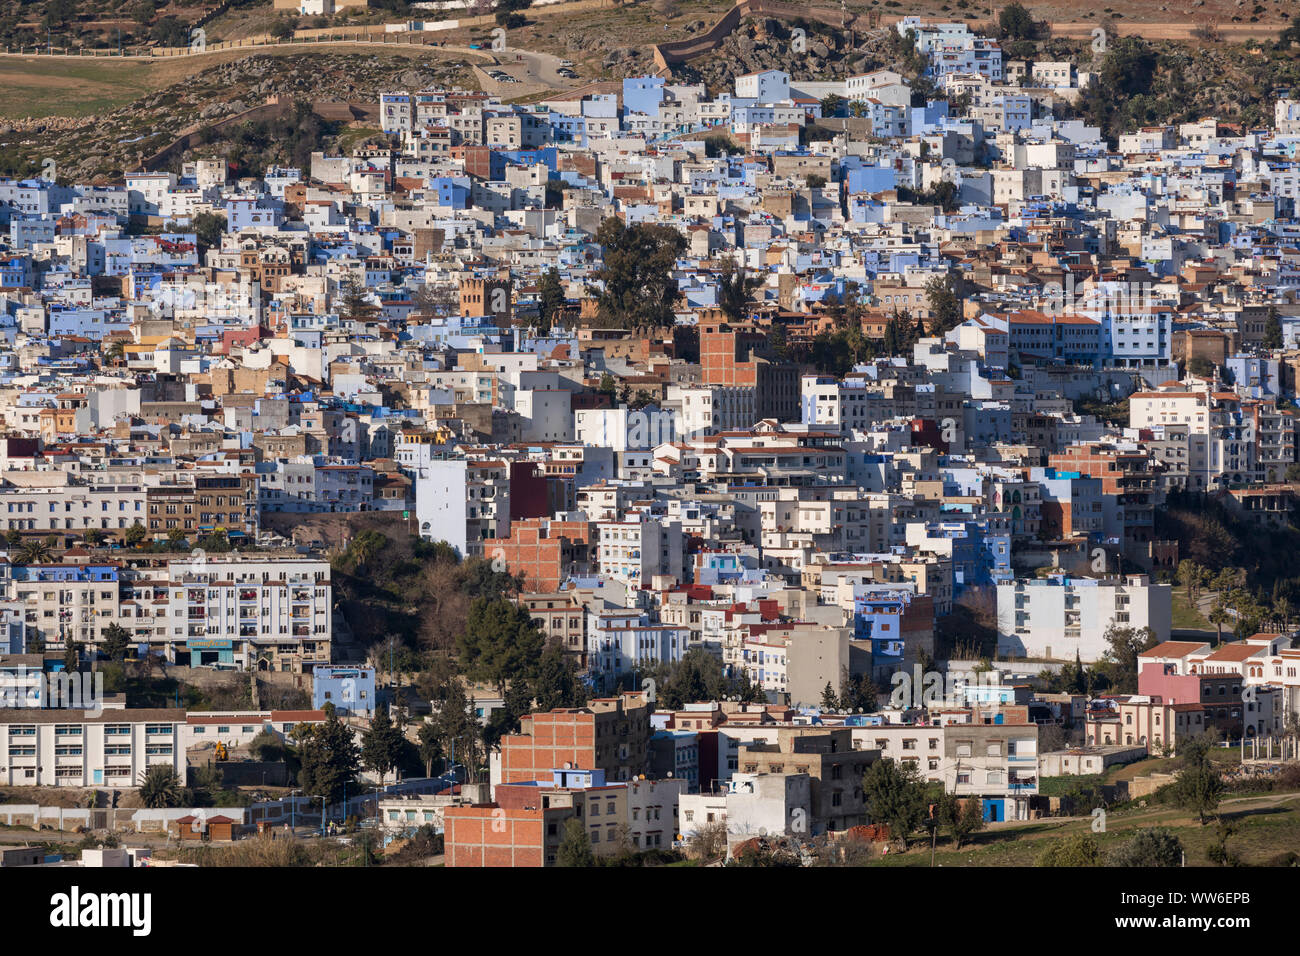 View of the city Chefchaouen, Morocco, North Africa, Africa Stock Photo